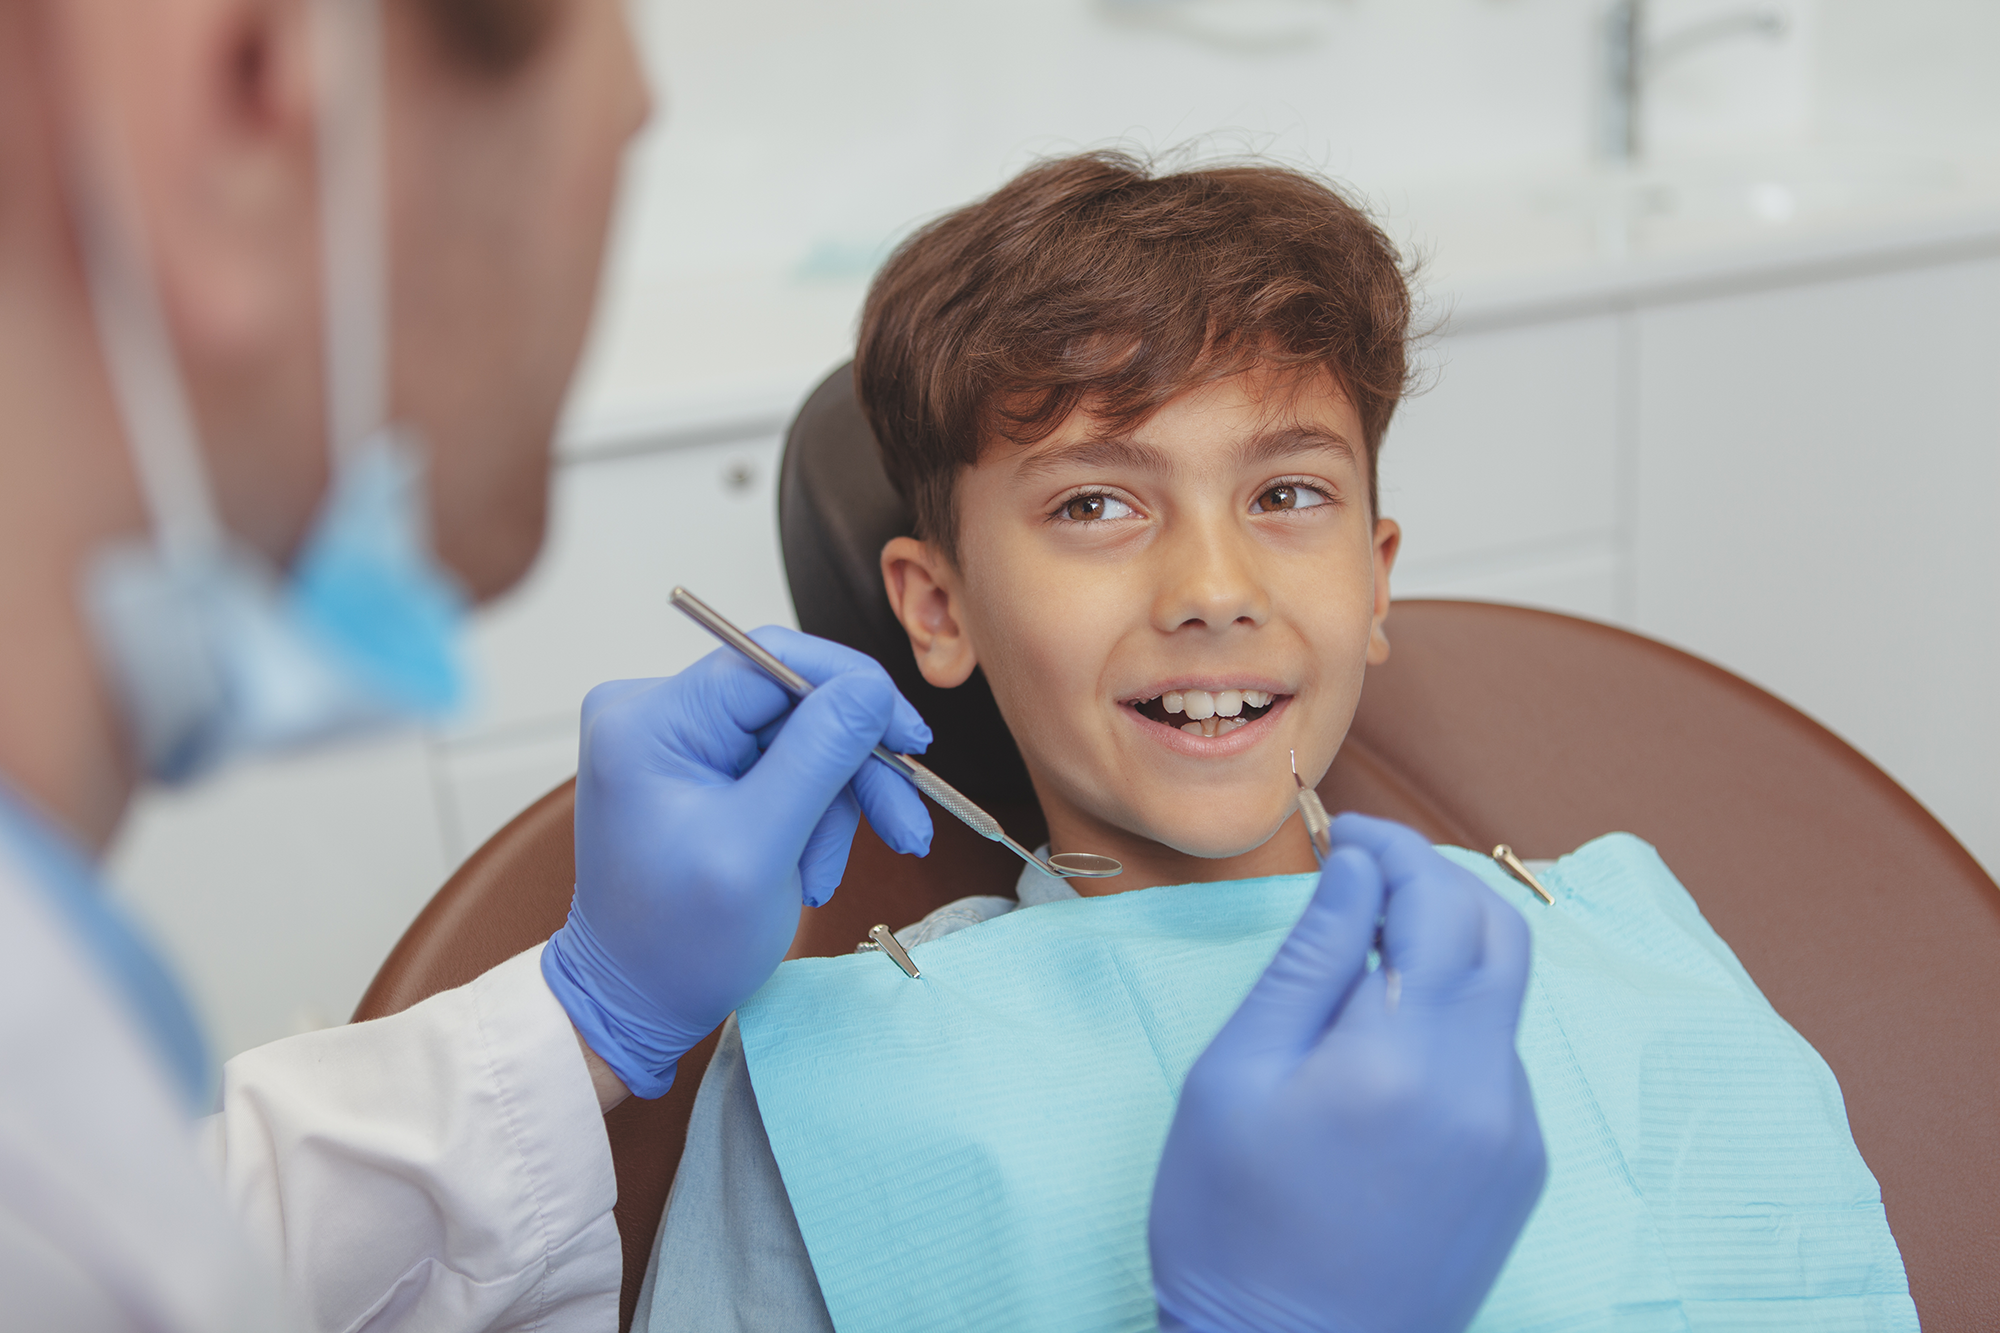 Orthodontic Treatments Without Braces? Yes, It's Possible! Teeth Cleanings Dental Teeth Cleaning Bella Vista Dental Bella Vista 4 Smiles dentist in Seguin Texas Dr. Lara Perry and Dr. Federico Gonzalez